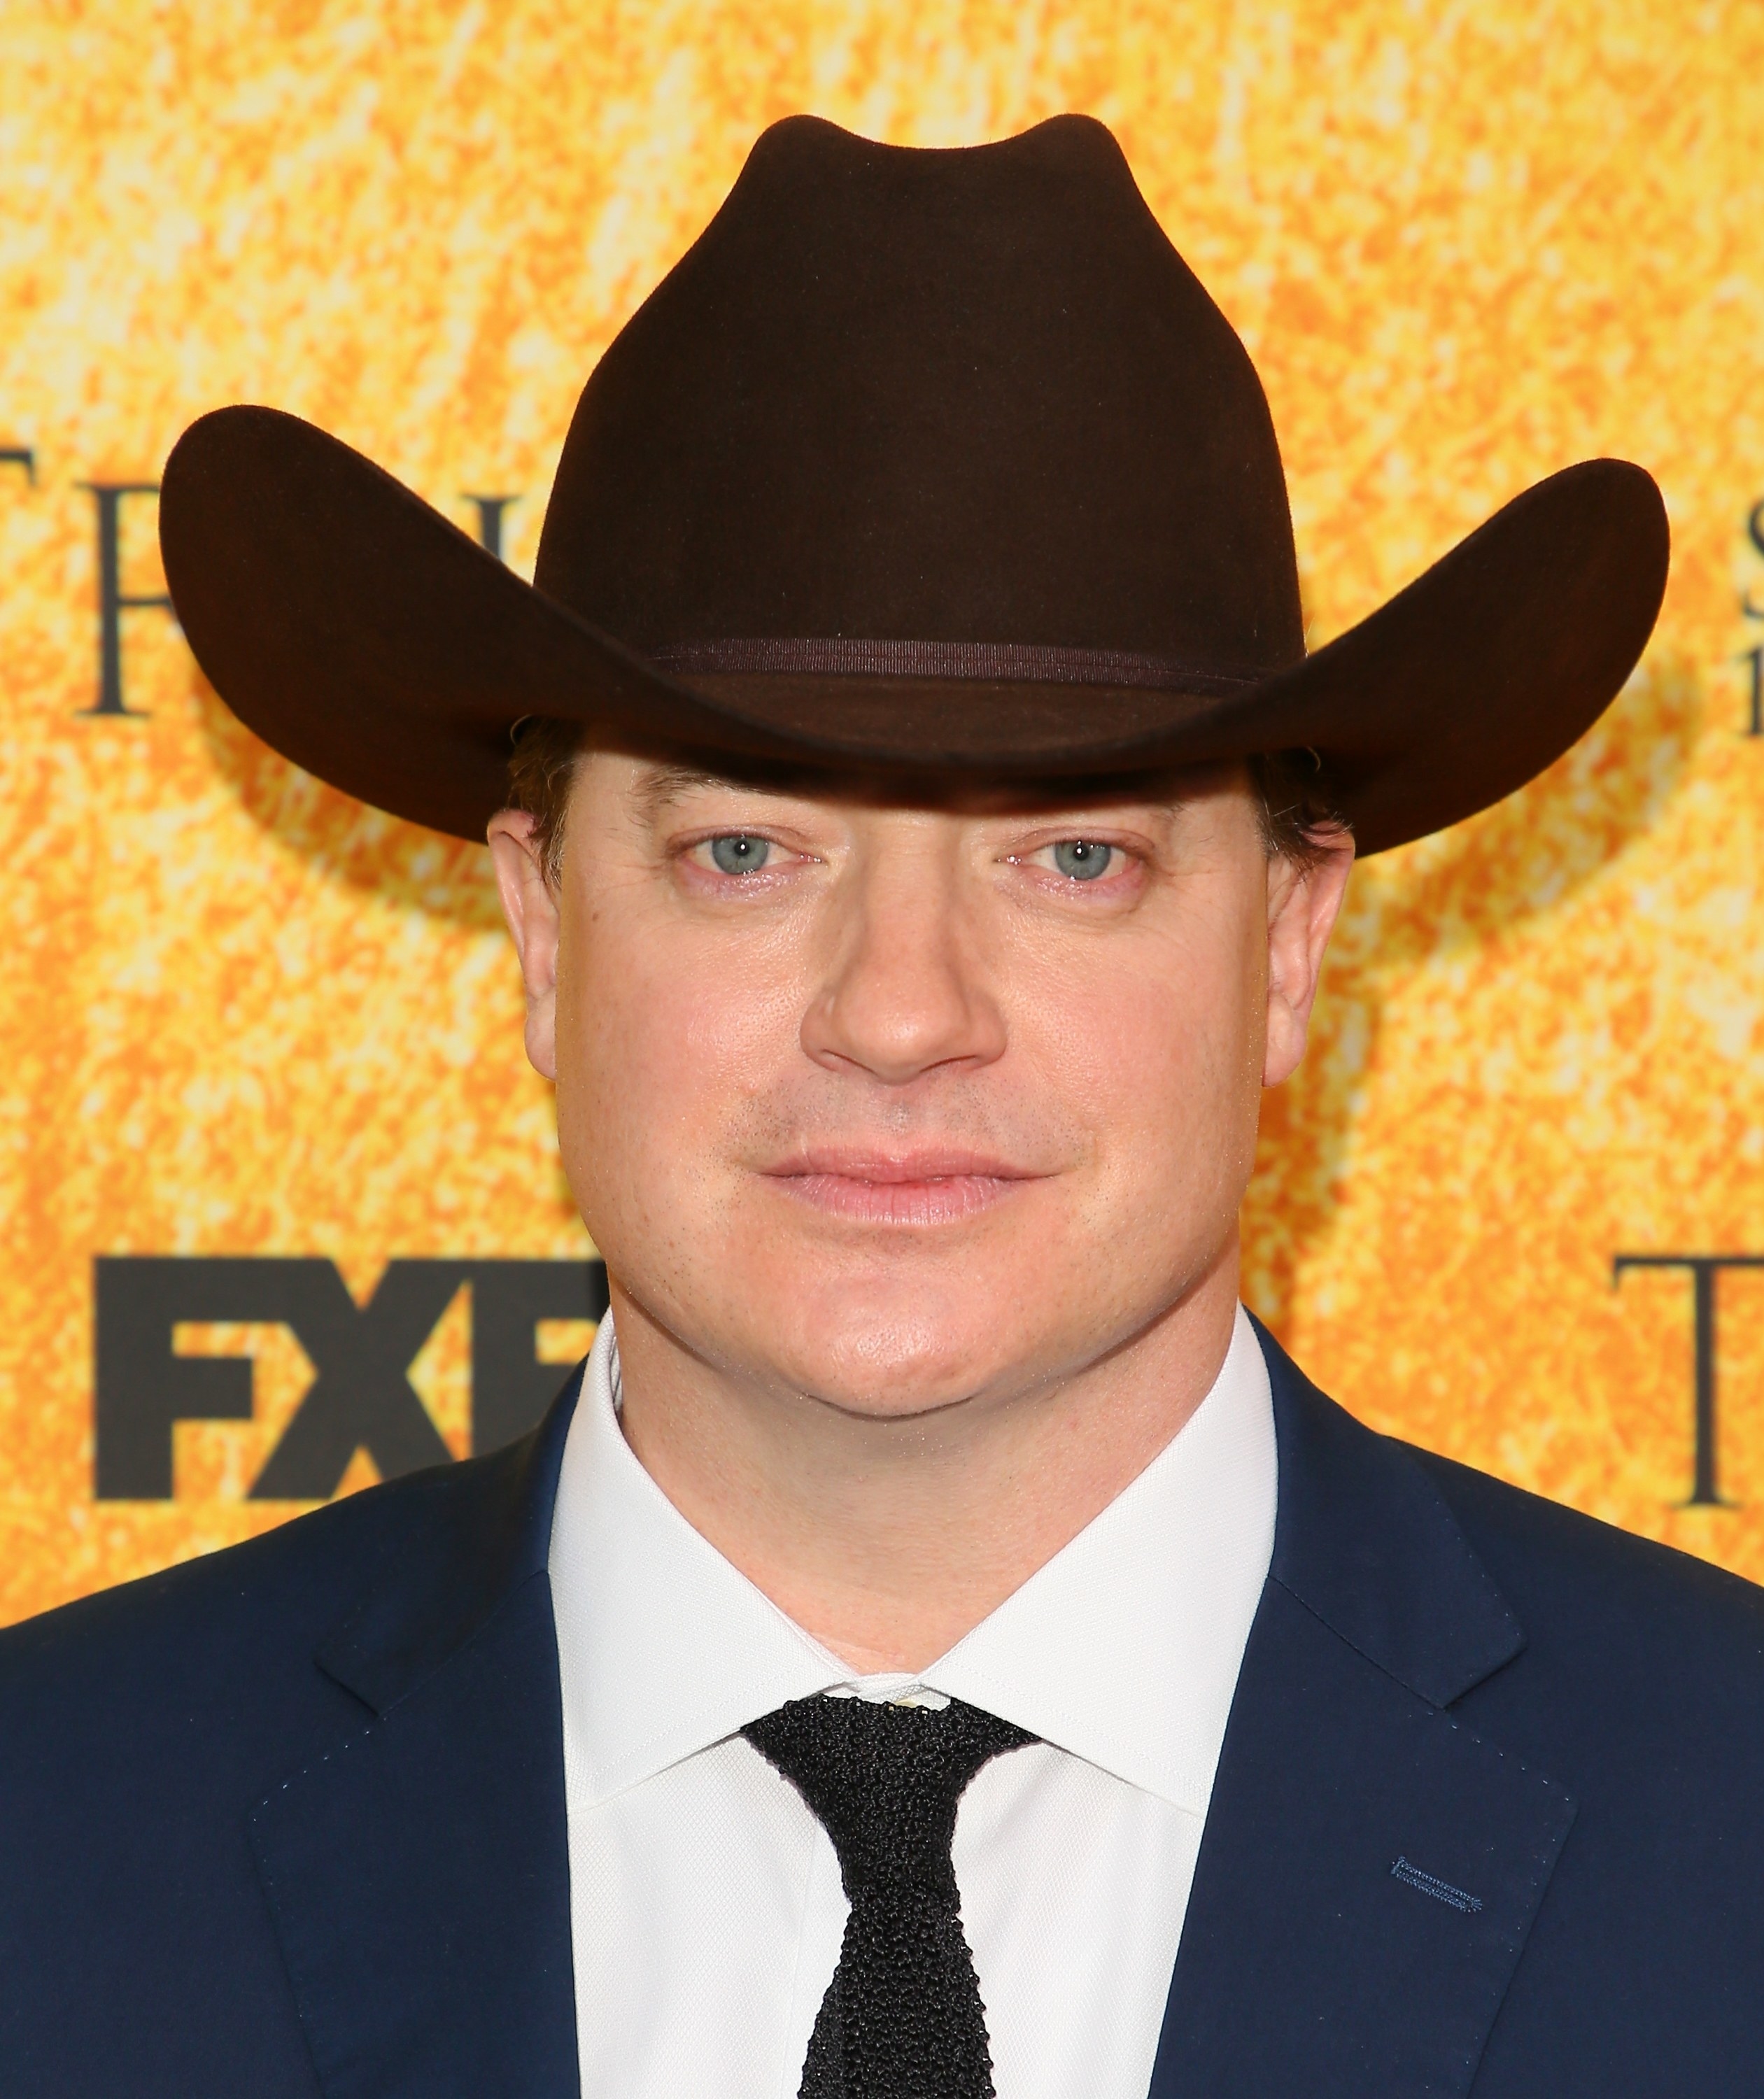 A closeup of Brendan Fraser wearing a cowboy hat and suit and tie at a red carpet event